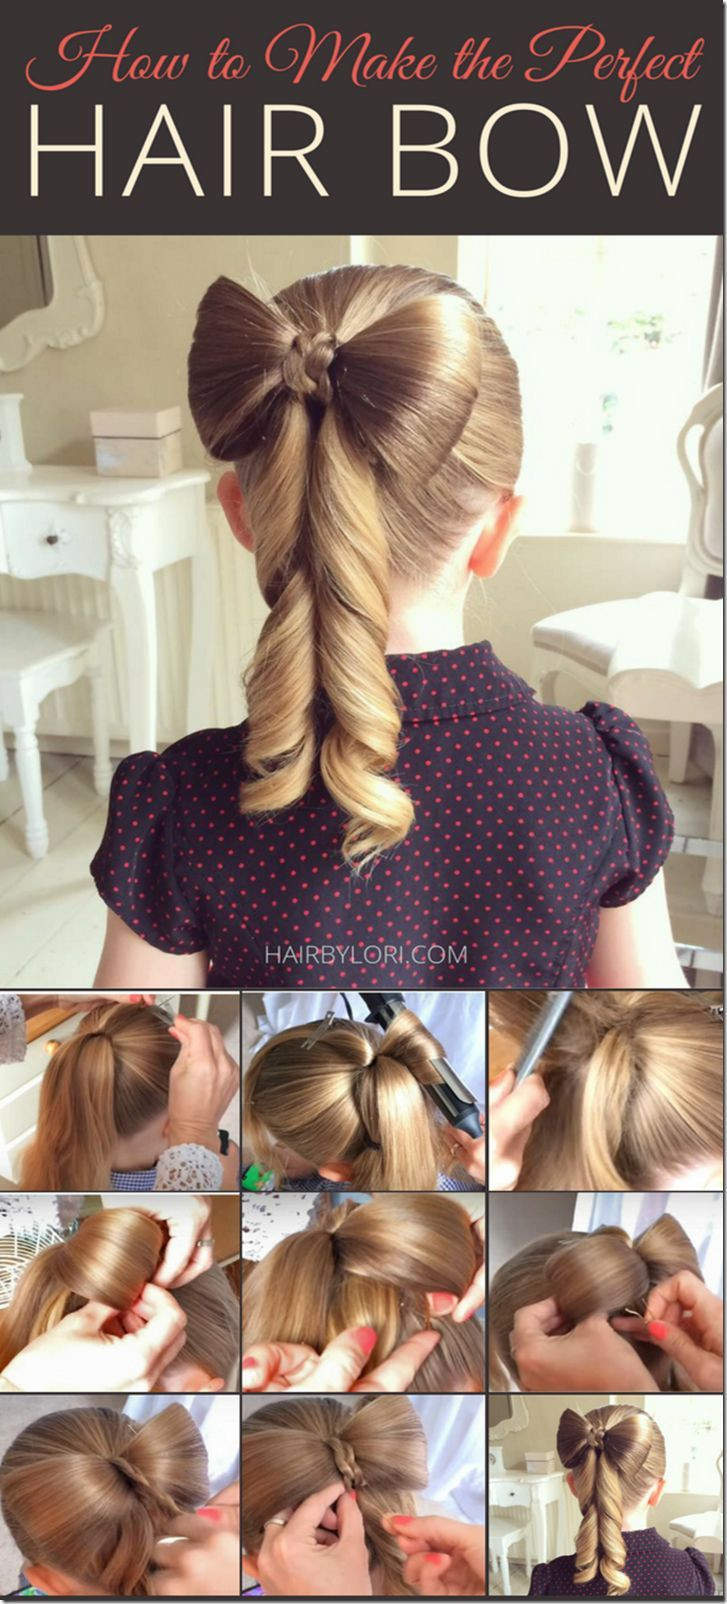 How To Make Cool Hairstyle
 10 Best and Easy Hairstyle Ideas for Summer 2017